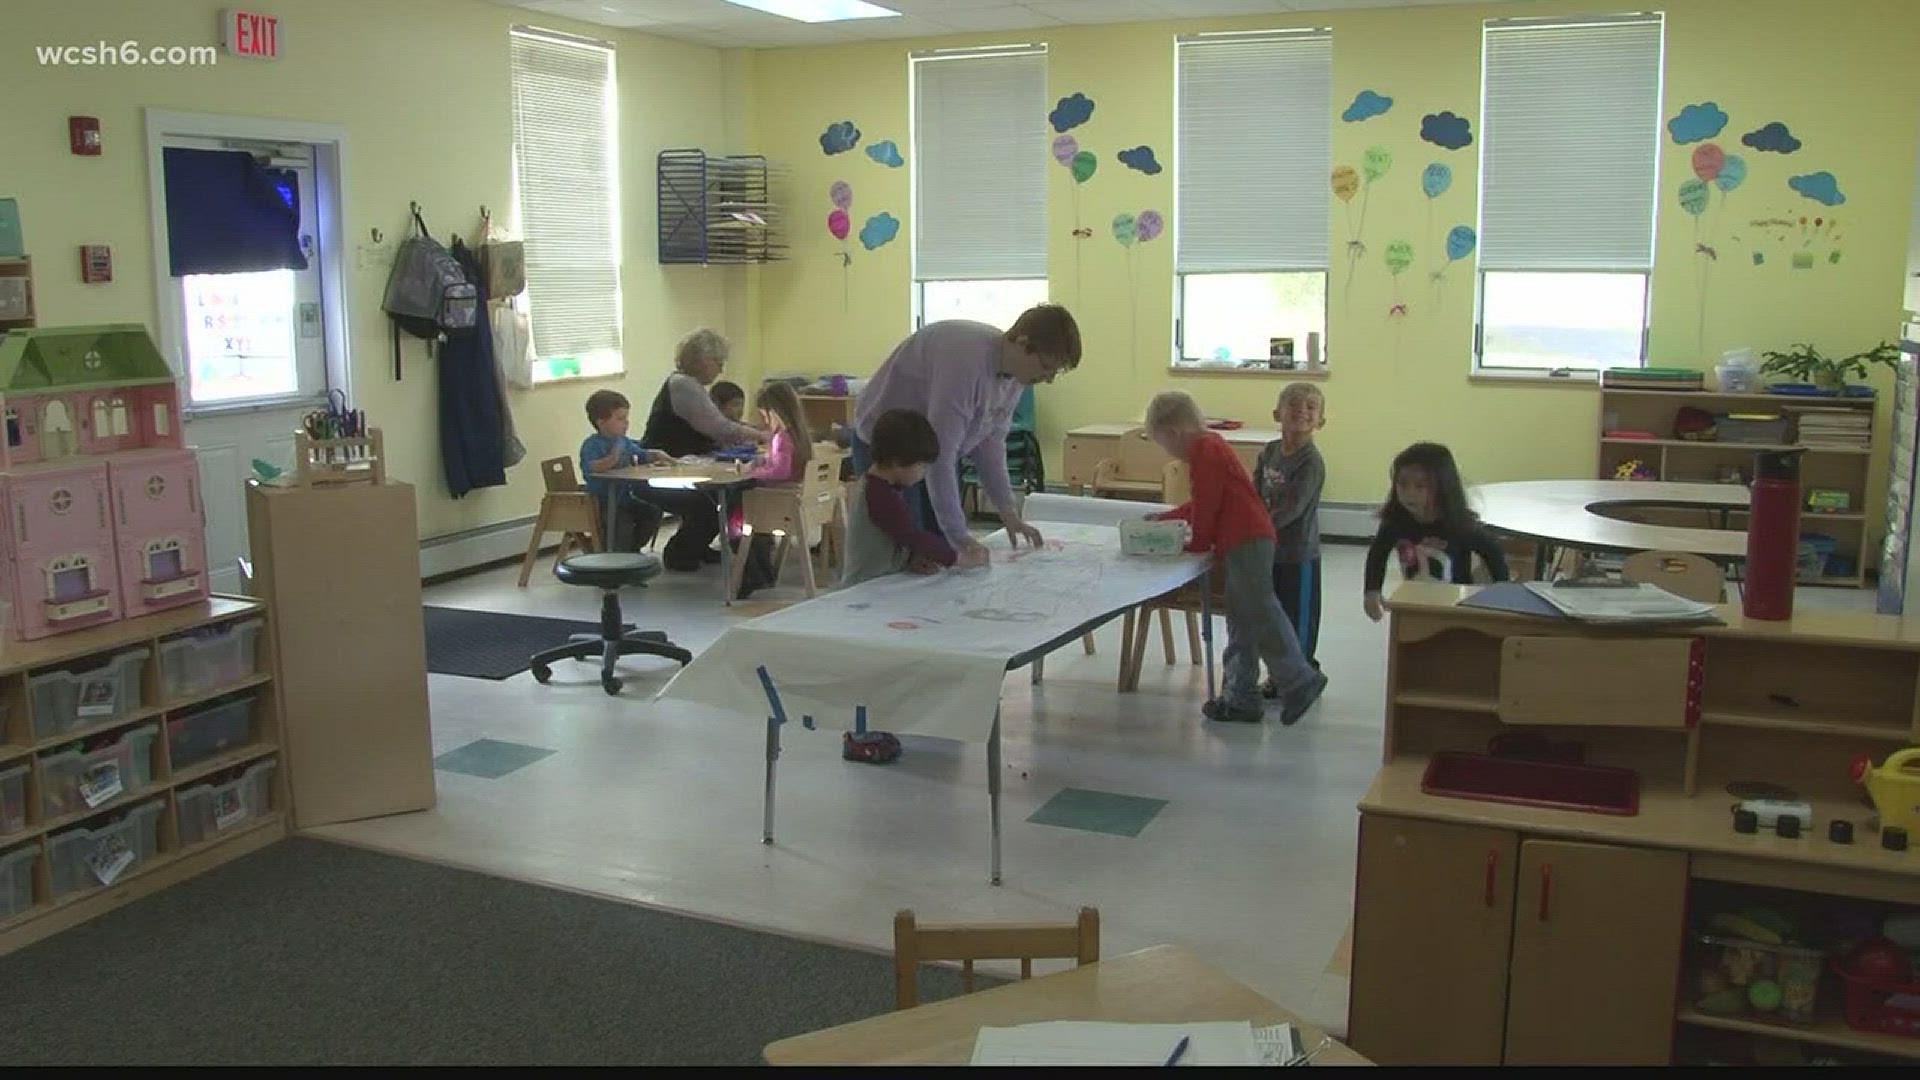 The Children's Center in Augusta, Farmington, Gardiner and Skowhegan is celebrating 50 years of providing services for children living with disabilities.